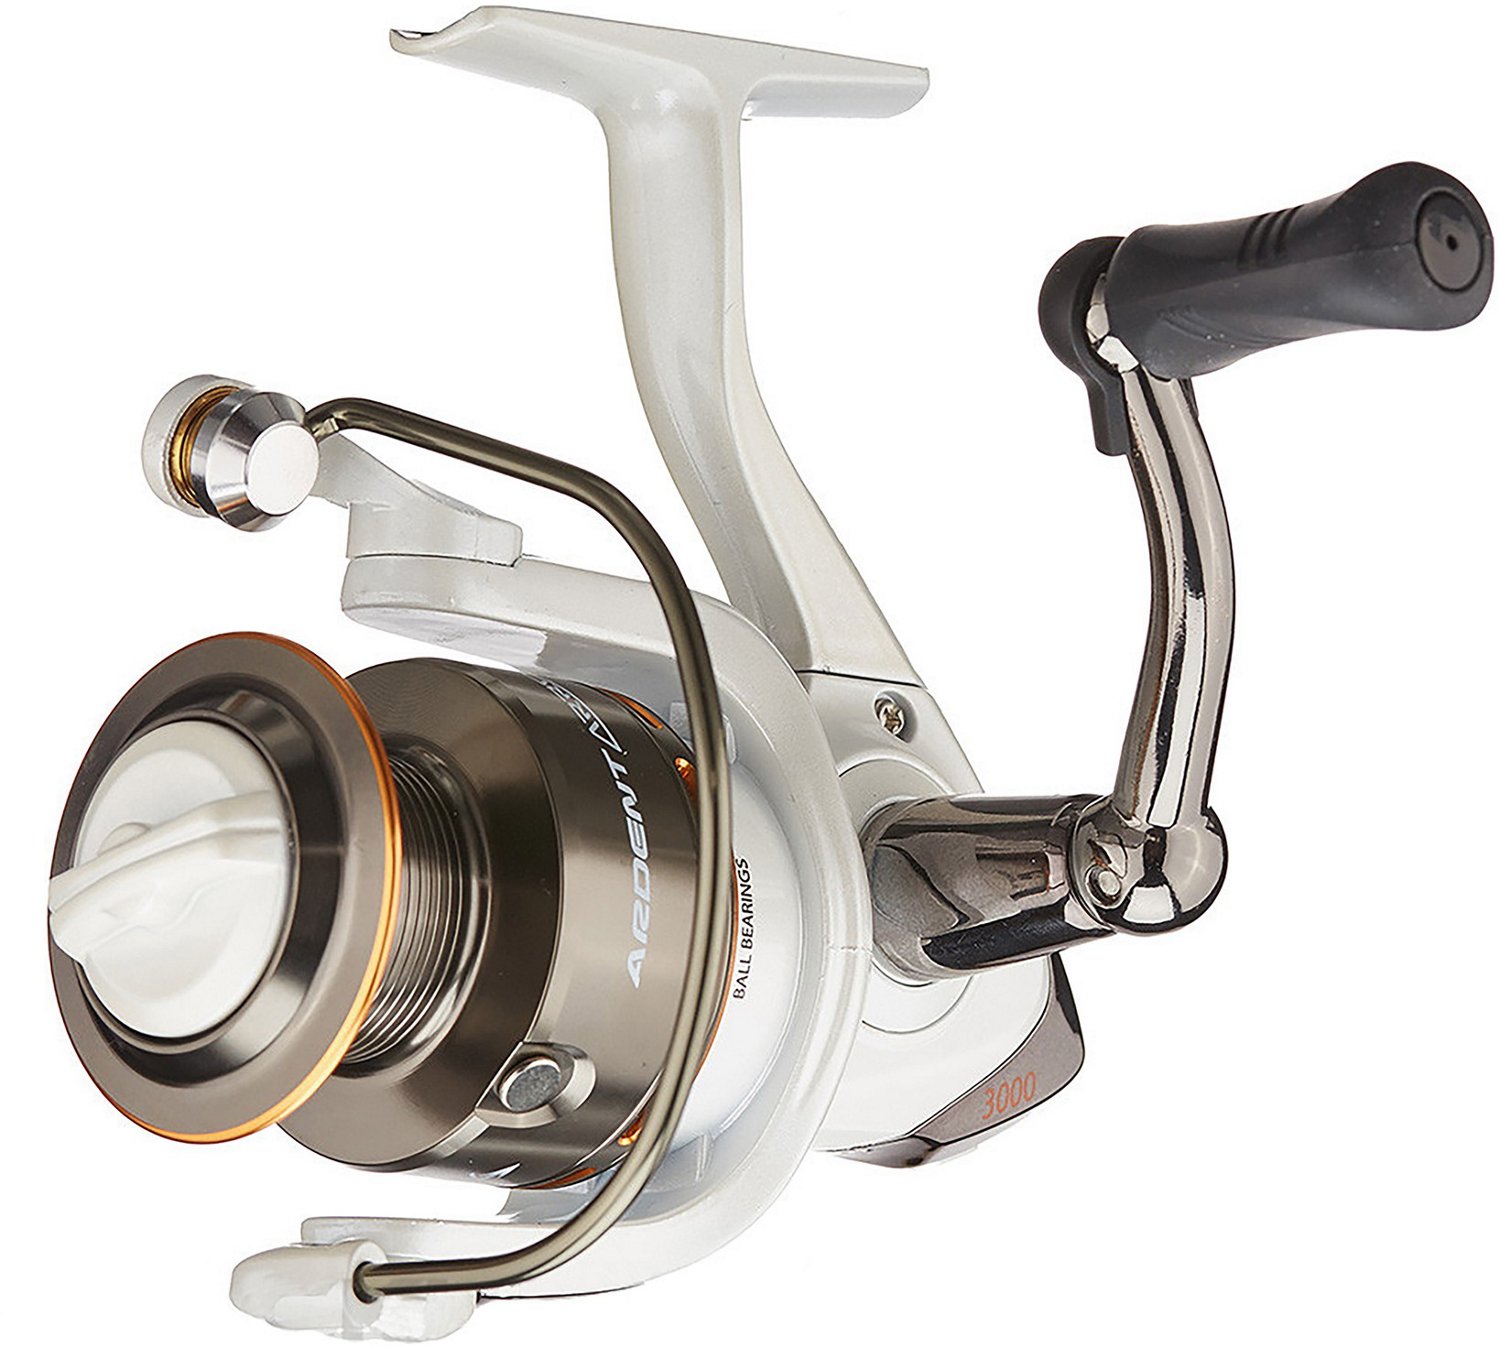 Academy Sports + Outdoors Ardent Arrow 2000 Spinning Reel